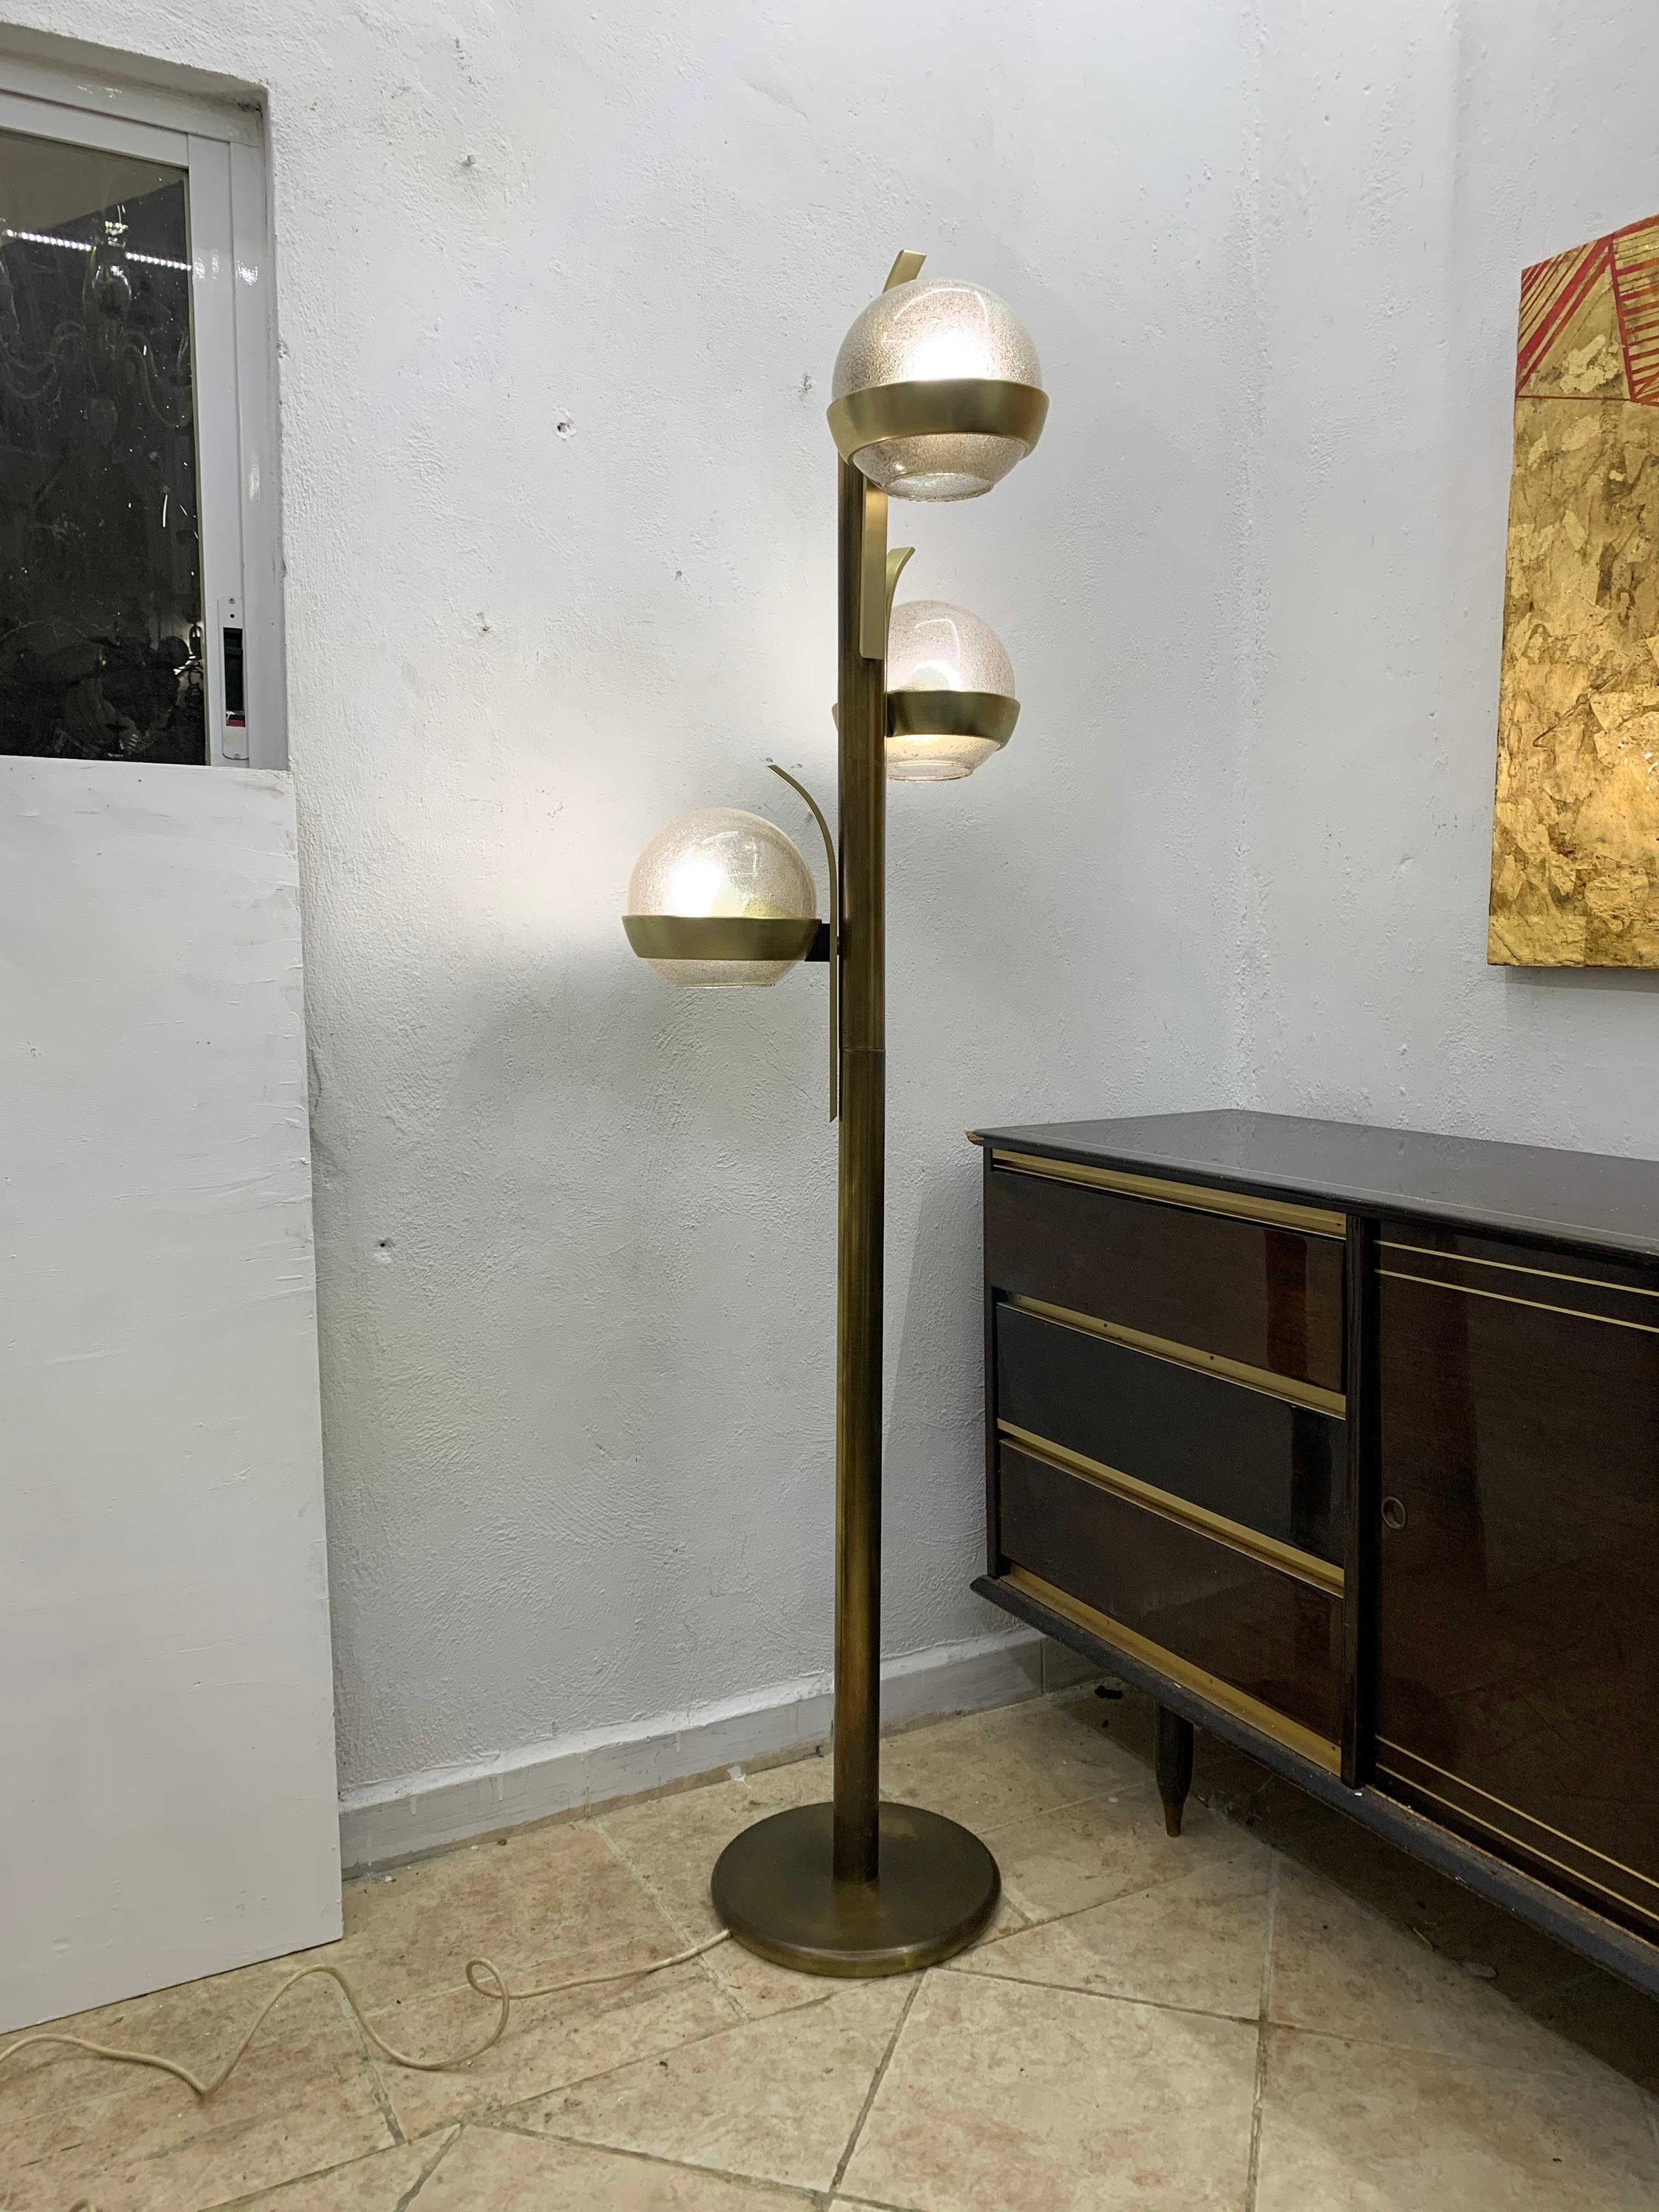 Space Age Floor Lamp by Lumi in Brass and Murano Glass, circa 1960s In Good Condition For Sale In Merida, Yucatan